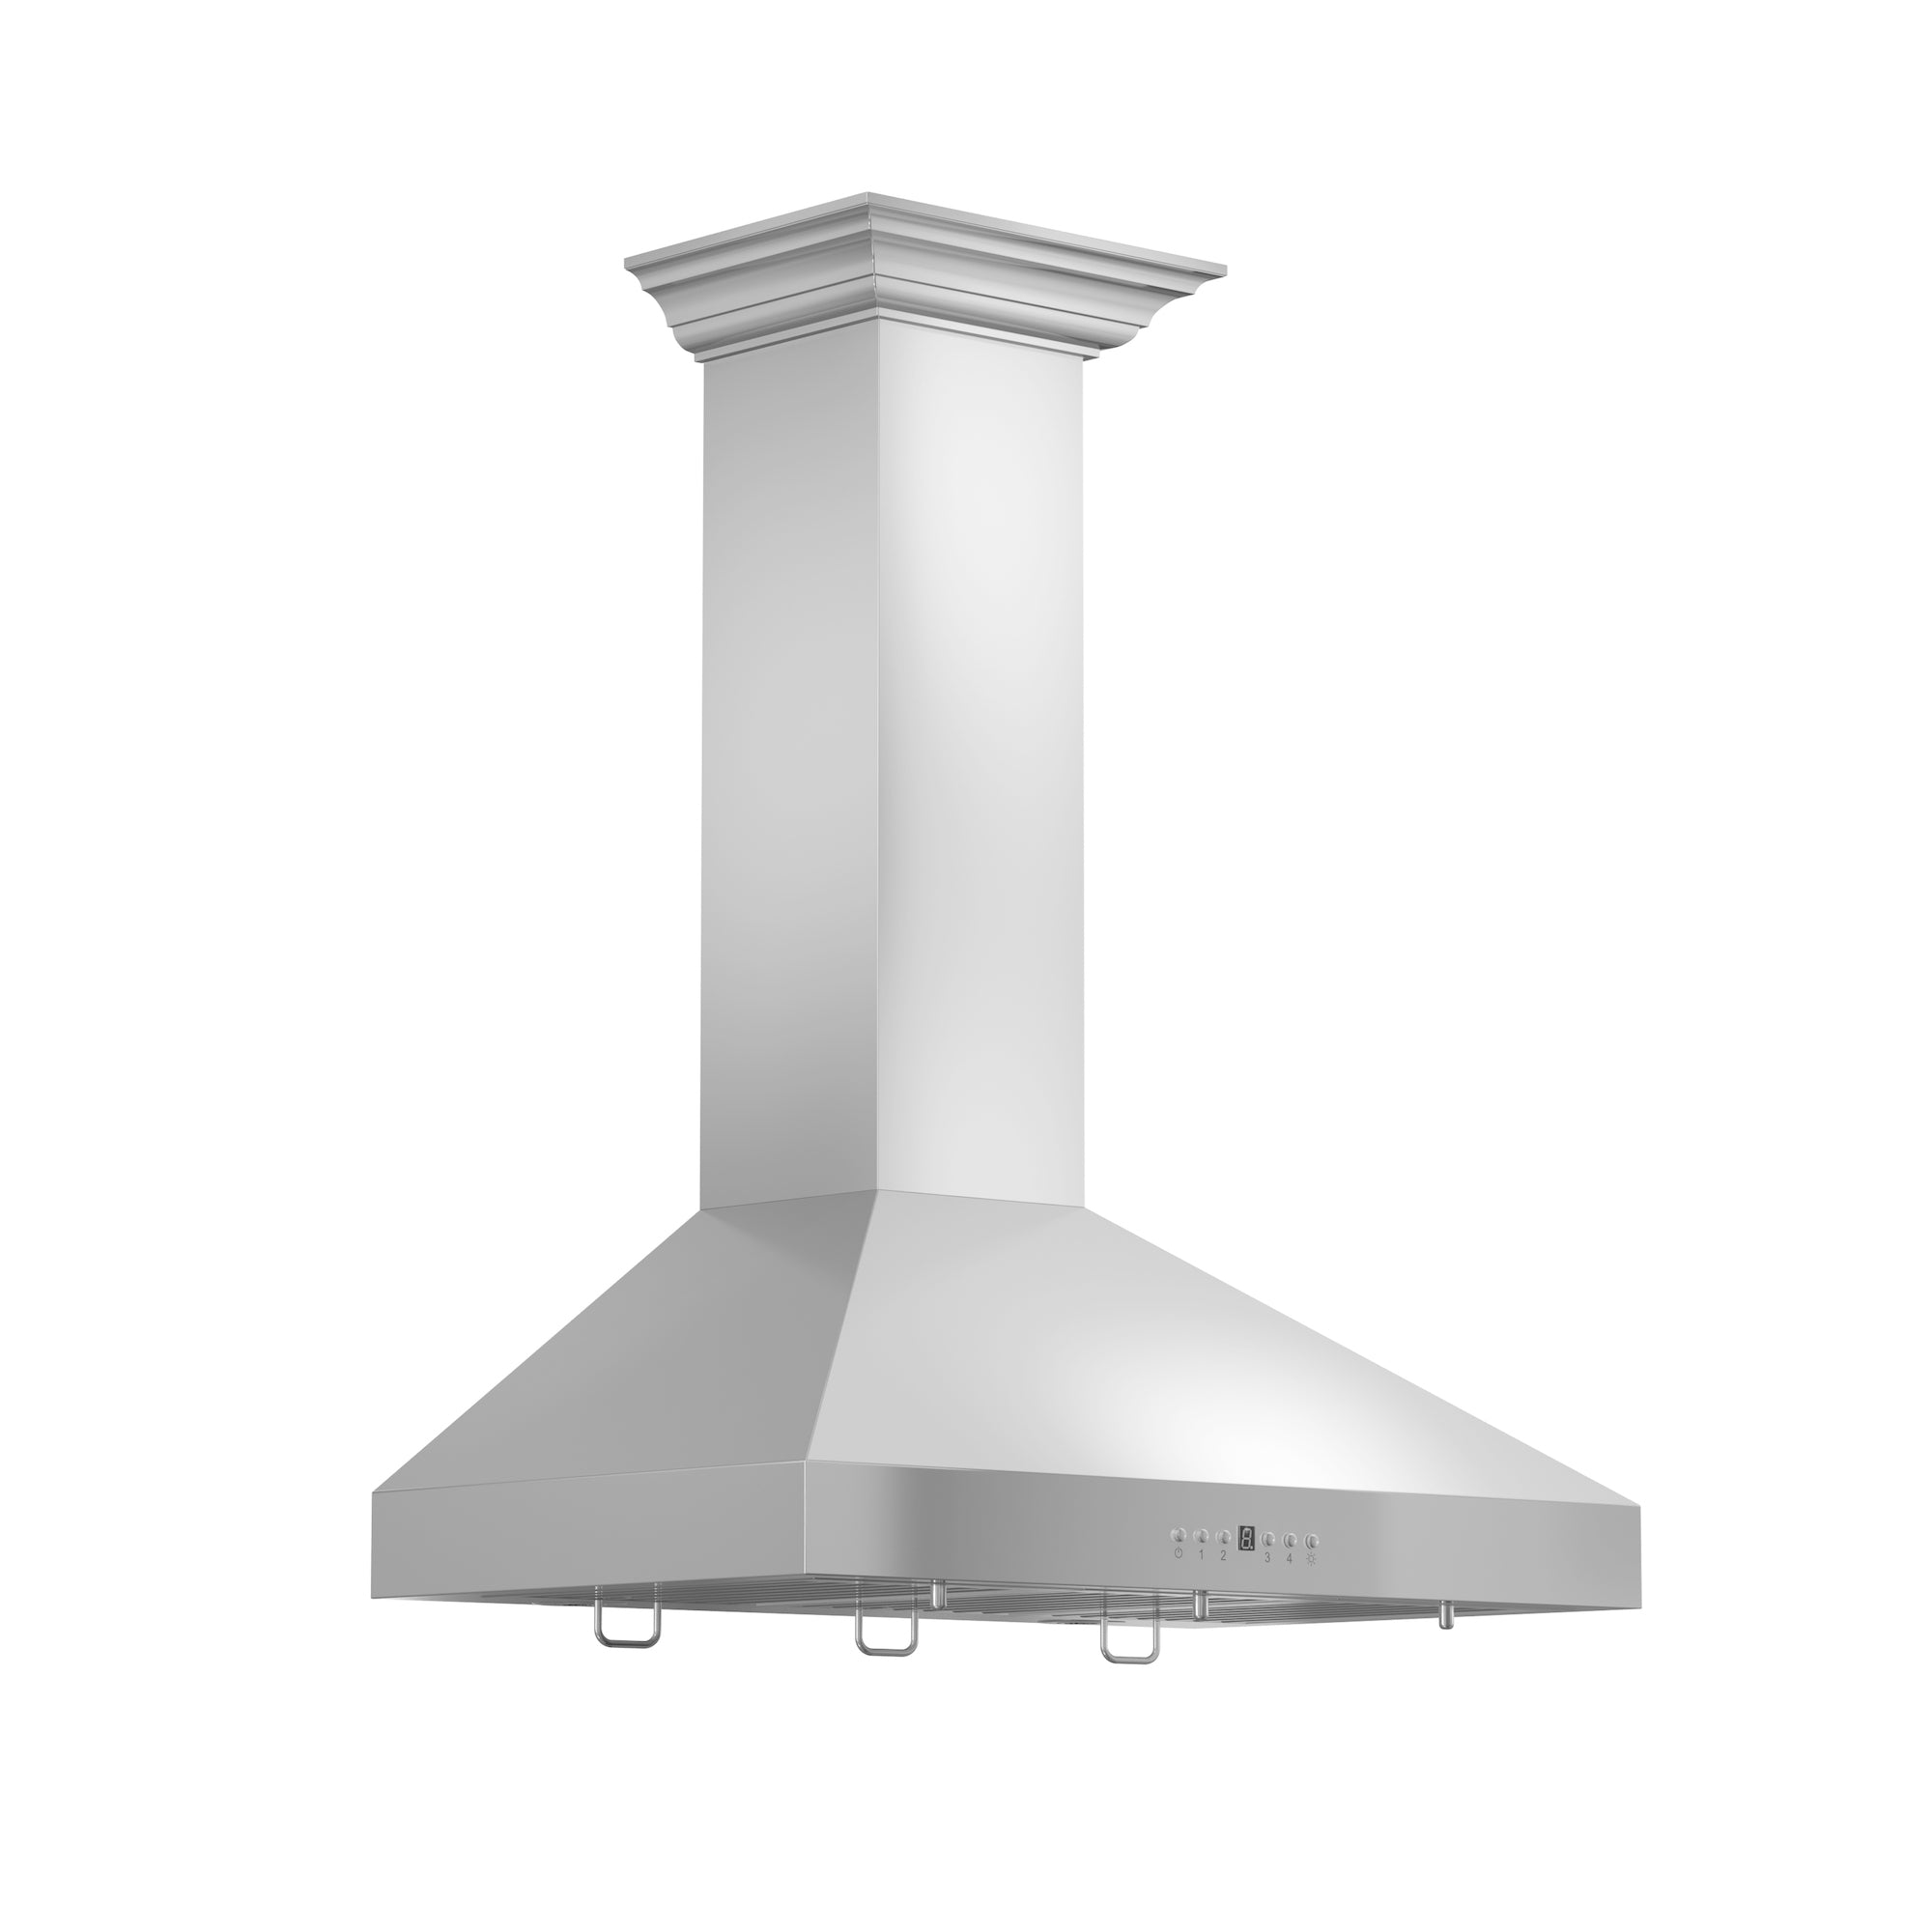 ZLINE 36" Convertible Vent Wall Mount Range Hood in Stainless Steel with Crown Molding (KL3CRN-36)